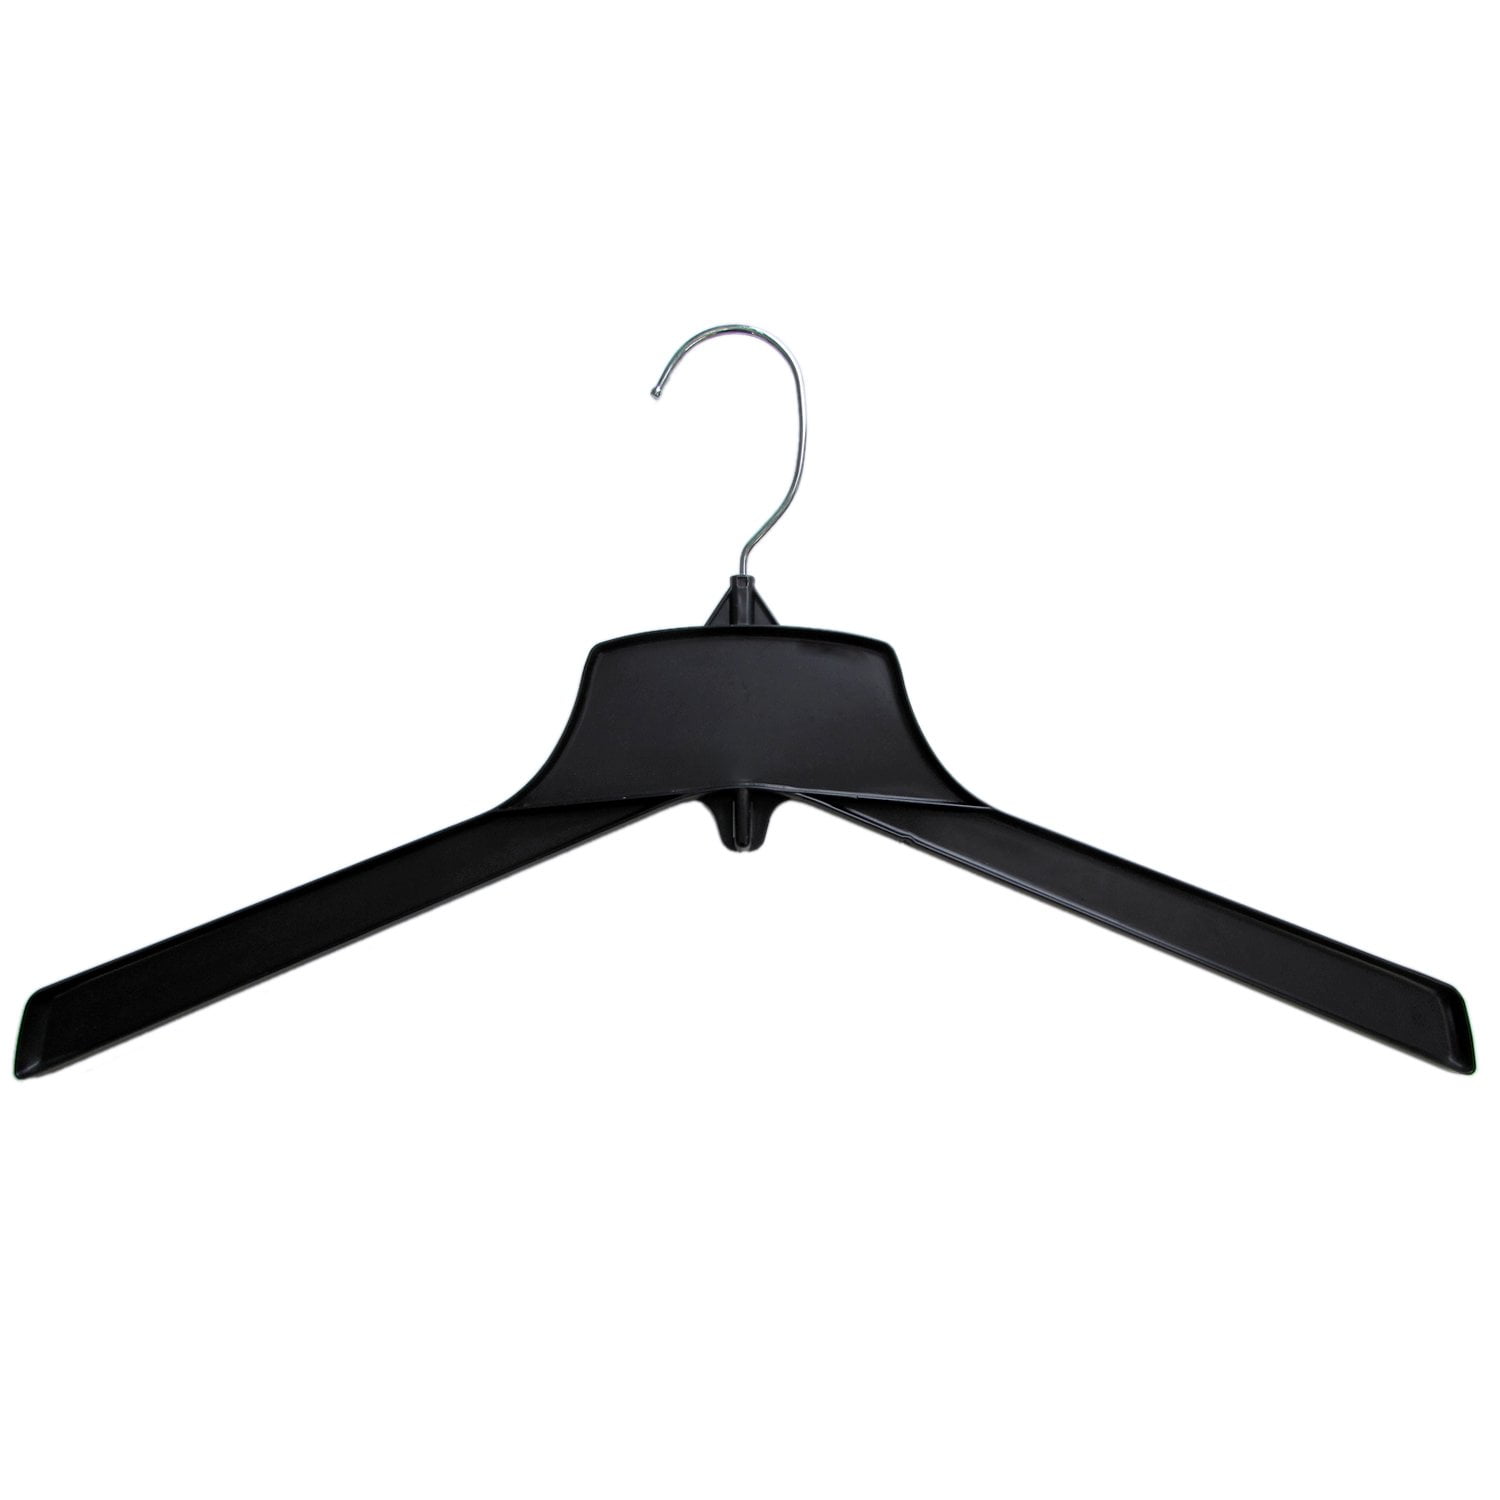 Hanger Central Recycled Black Heavy Duty Plastic Outerwear Hangers with Short Polished Metal Swivel Hooks, 17 inch, 10 Set